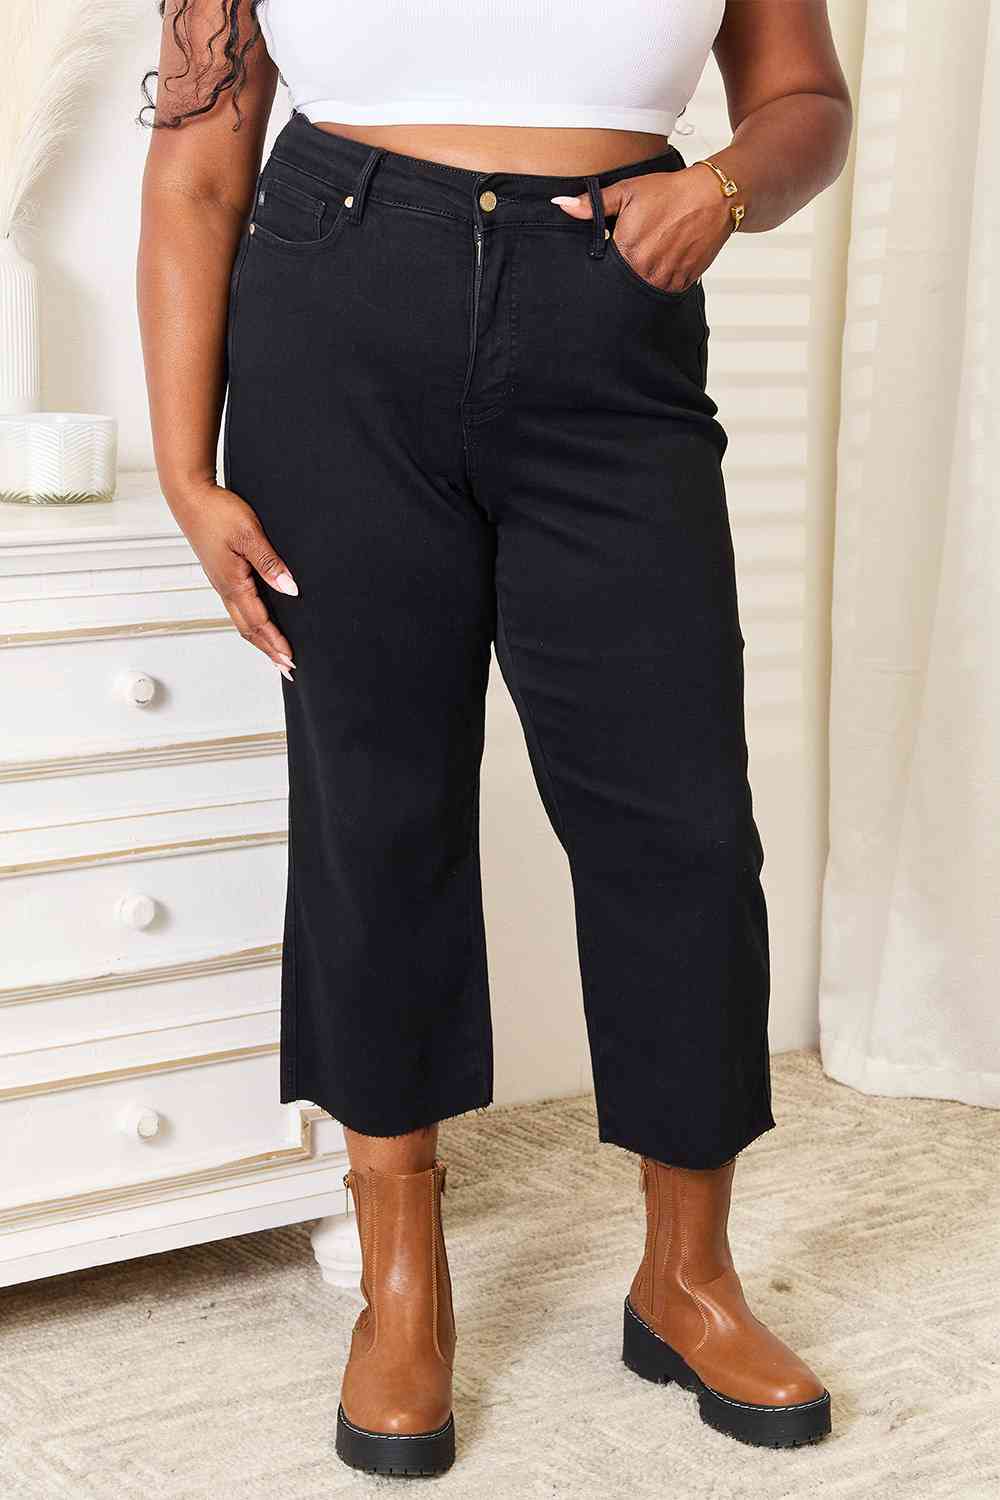 These jeans are a must-have addition to your wardrobe, offering a sleek and sophisticated look with their high waisted design that accentuates your curves. The cropped wide leg adds a touch of flair and versatility, allowing you to pair them effortlessly with both casual and formal outfits. What sets these jeans apart is their clean, no-distressing finish, making them a chic choice for any occasion.